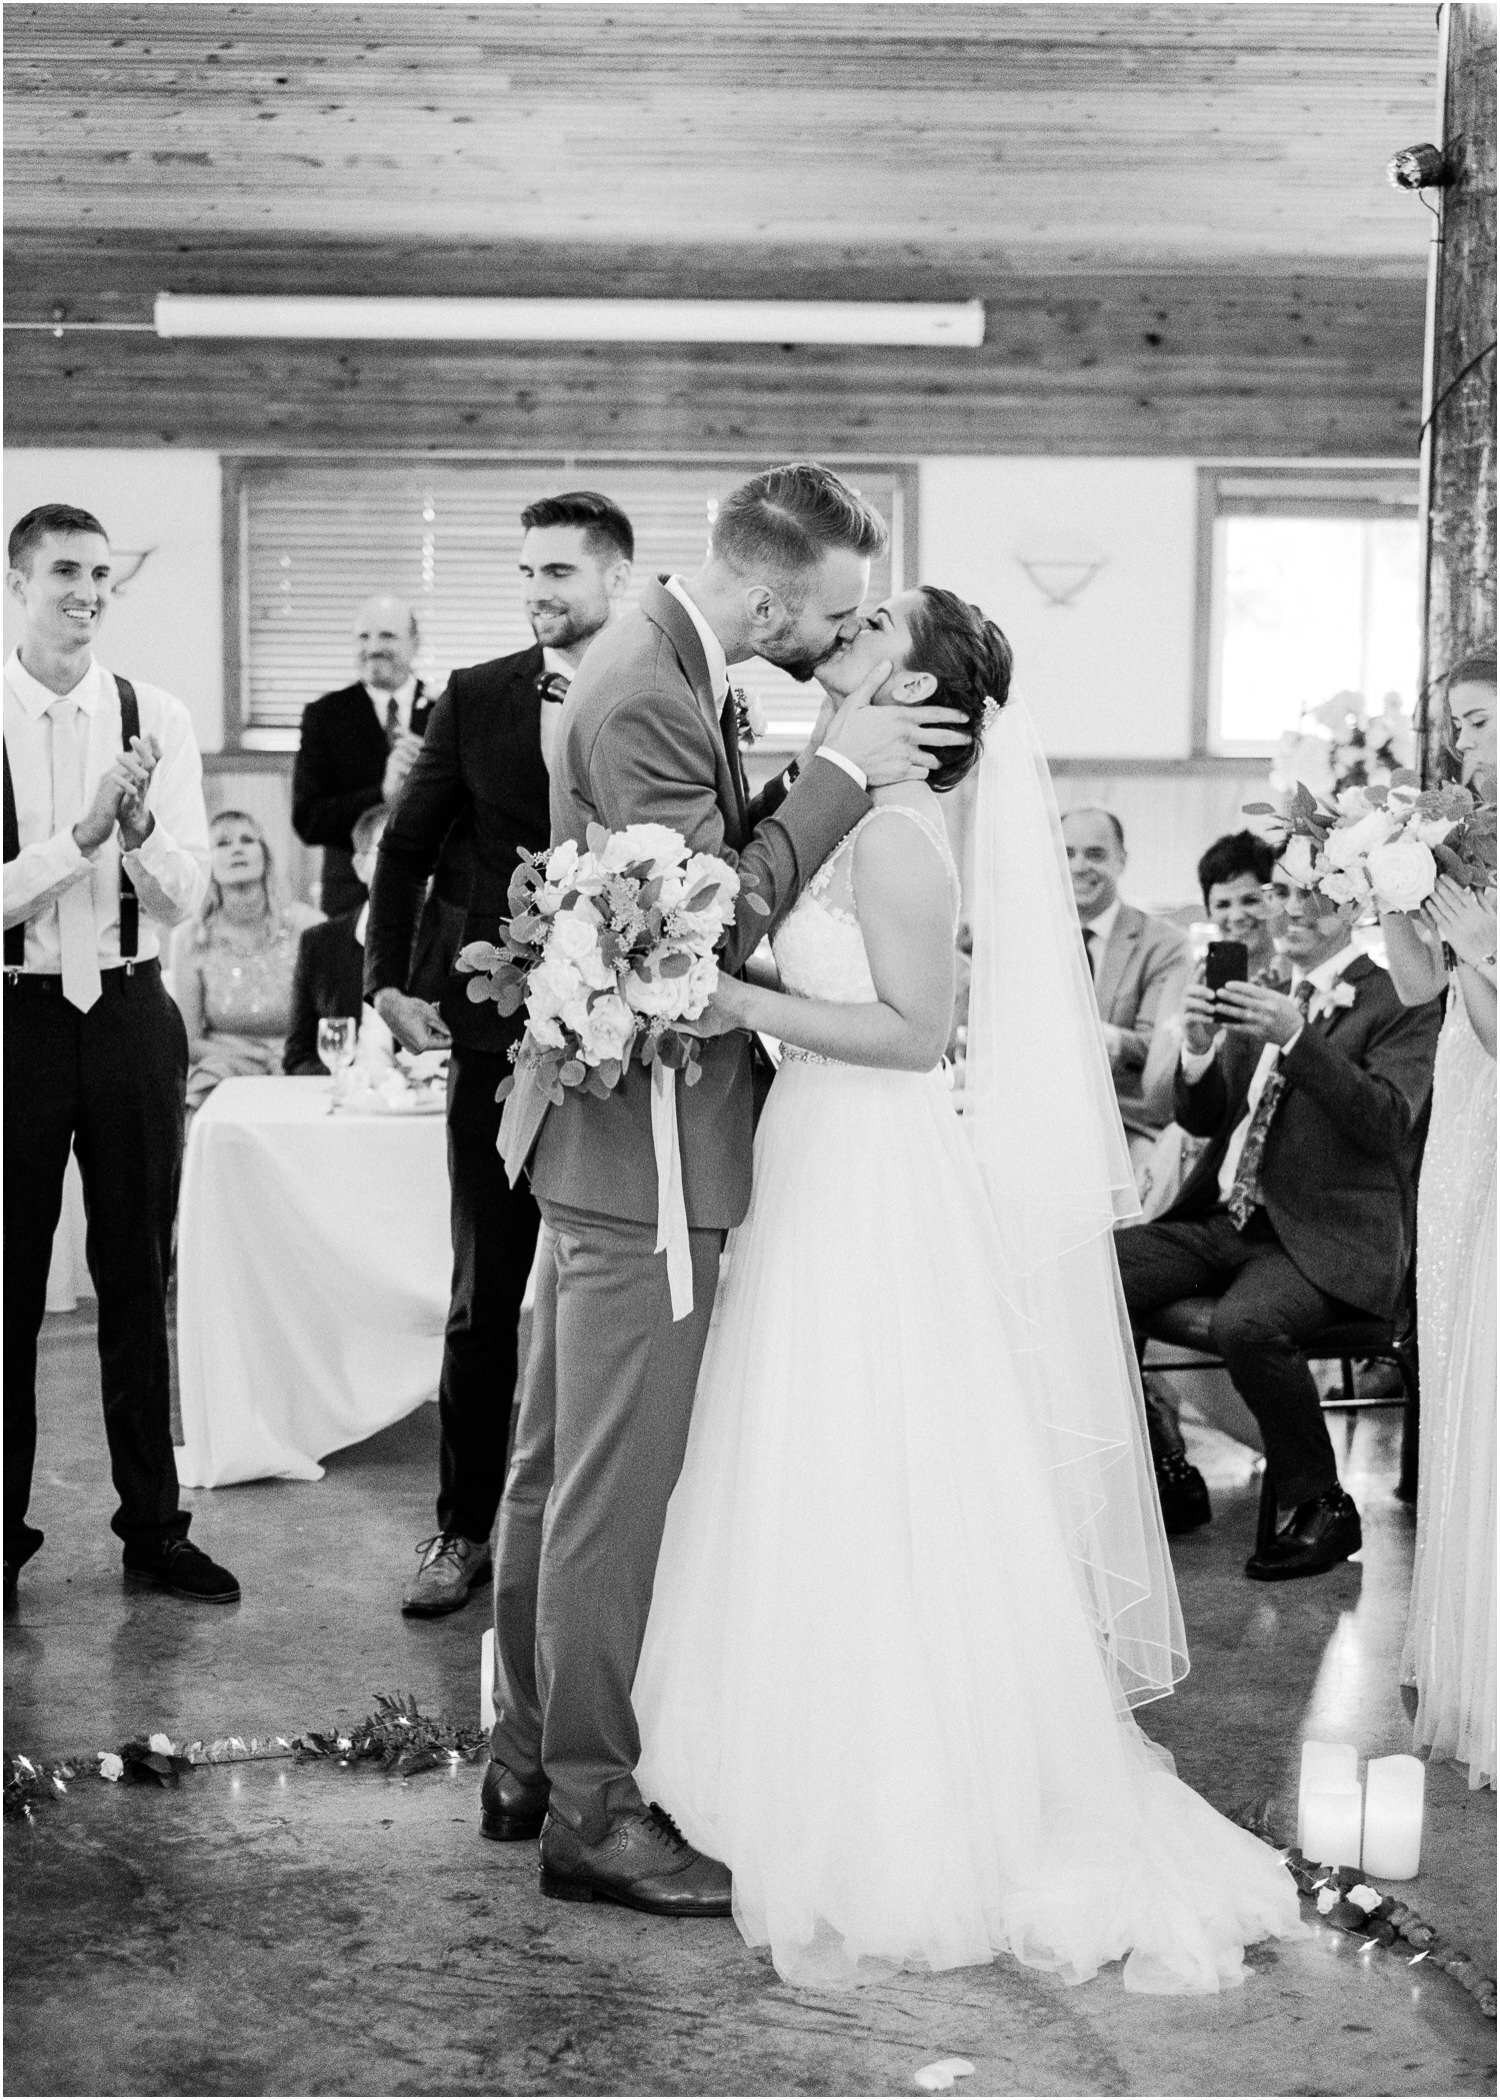  Bride and groom kiss in black and white photo after wedding ceremony 